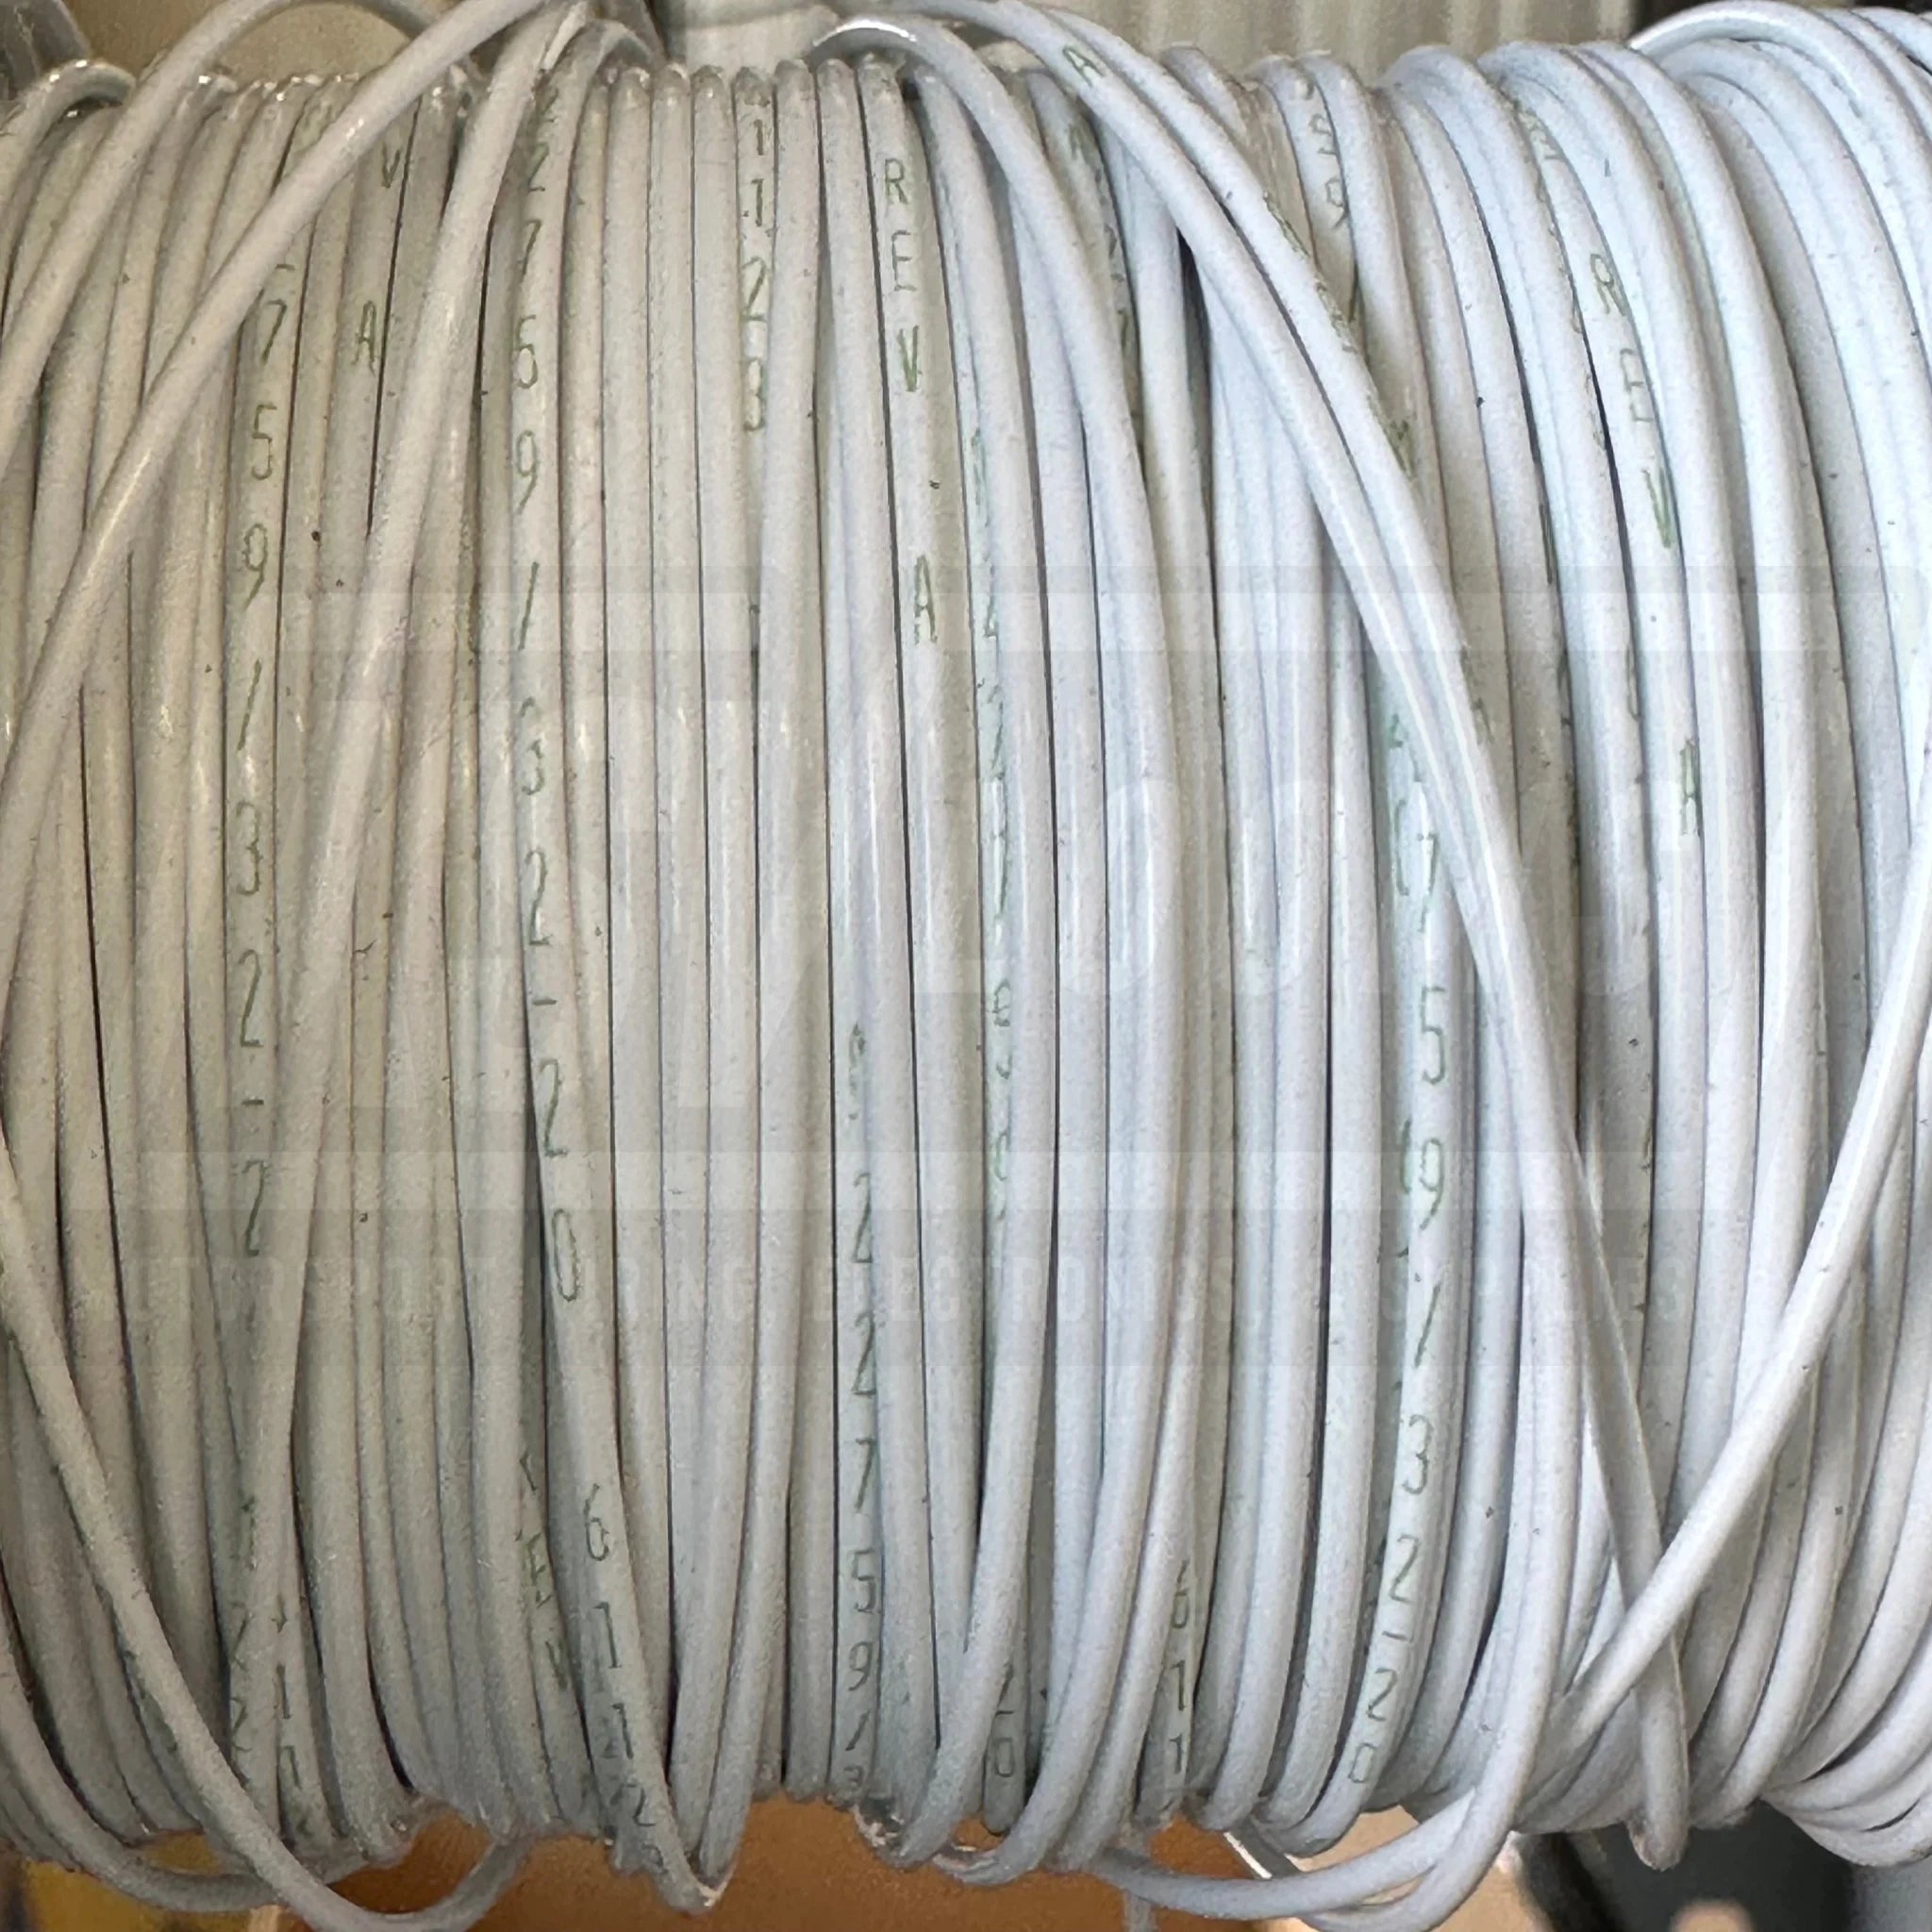 20 Awg White Tefzel Wire M22759/32-20-9 (Cut Length)